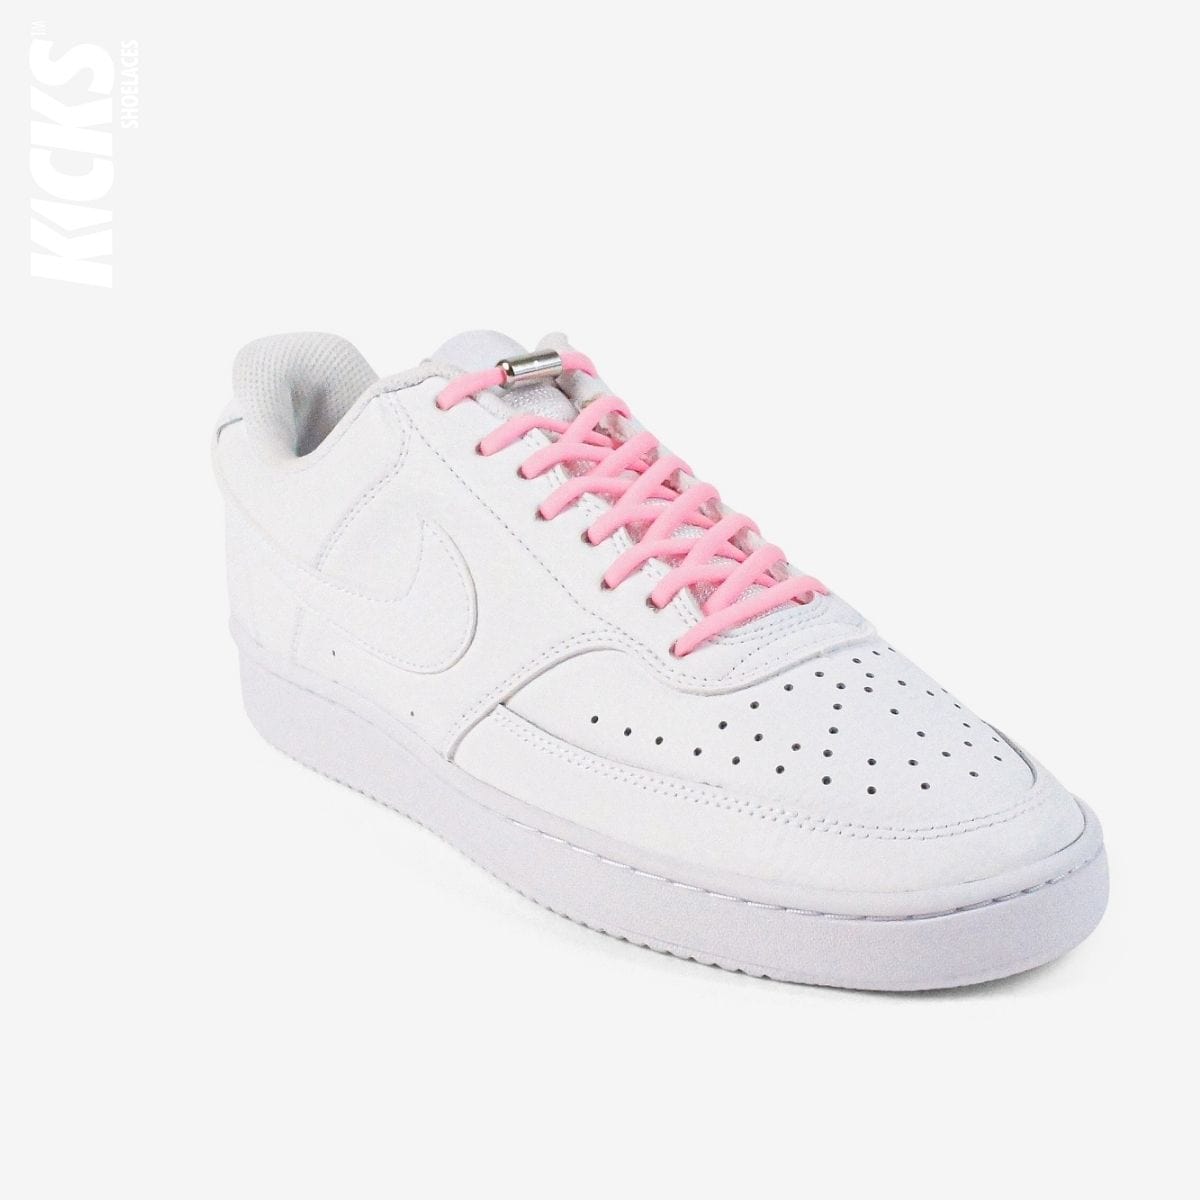 round-no-tie-shoelaces-with-pink-laces-on-nike-white-sneakers-by-kicks-shoelaces